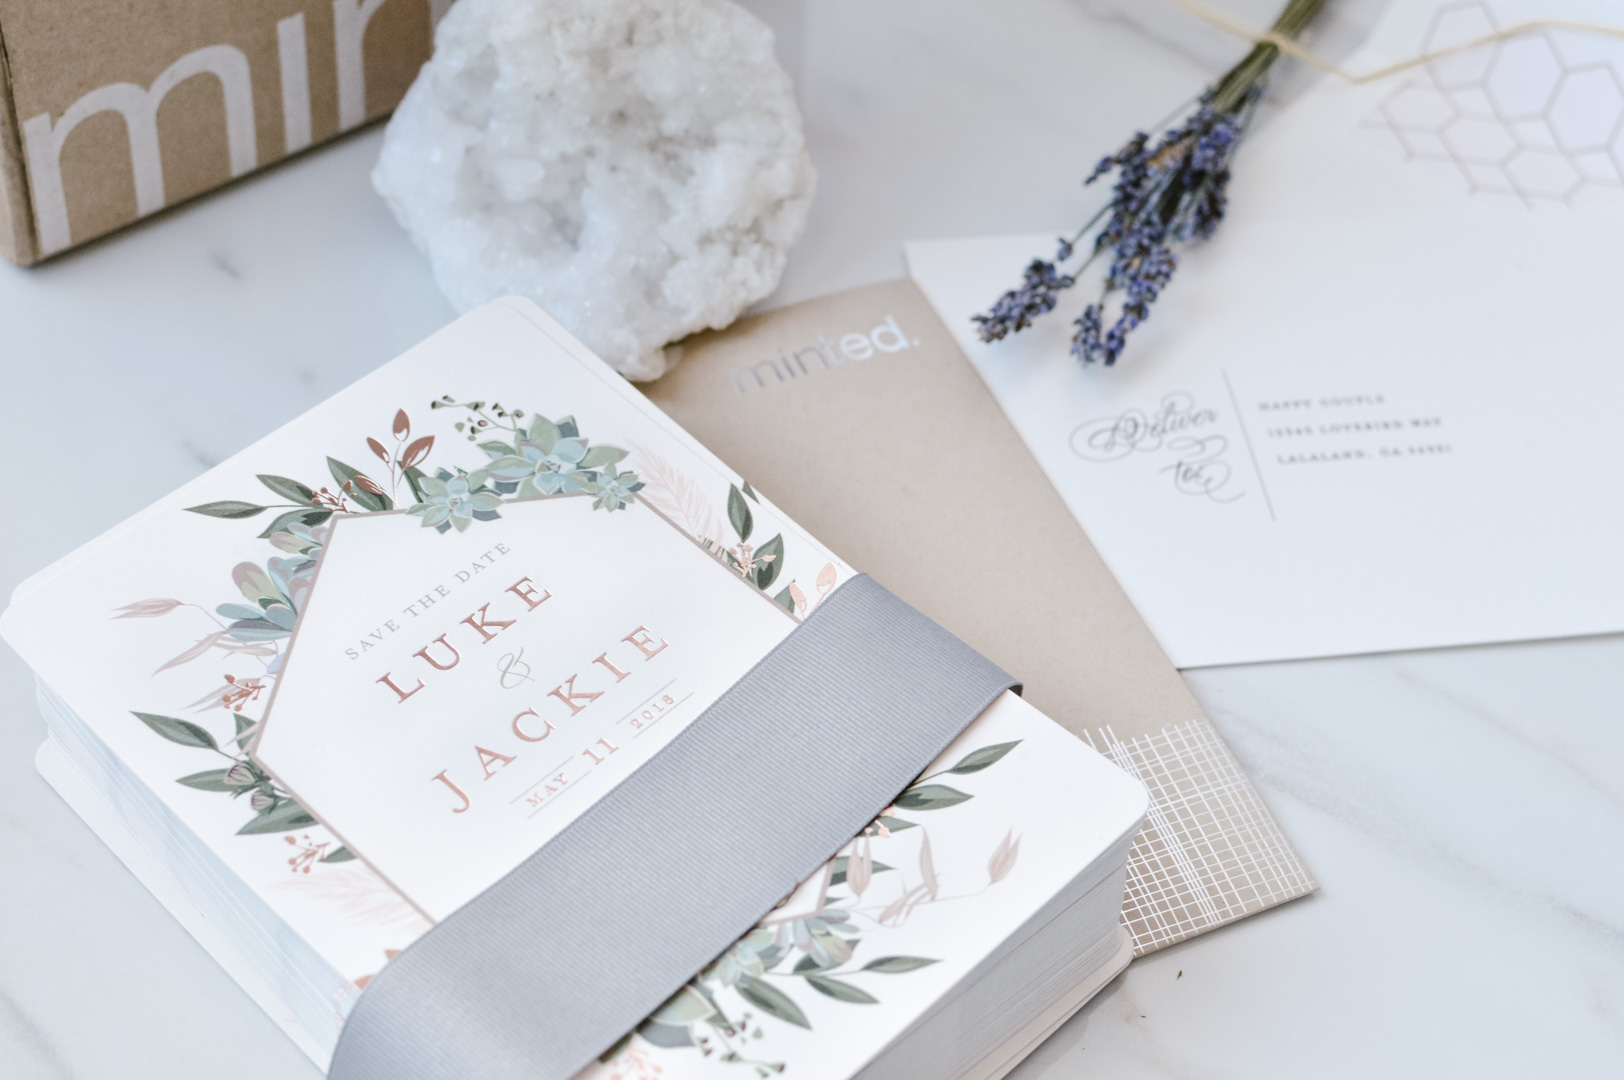 Jackie roque and Luke save the date with Minted.